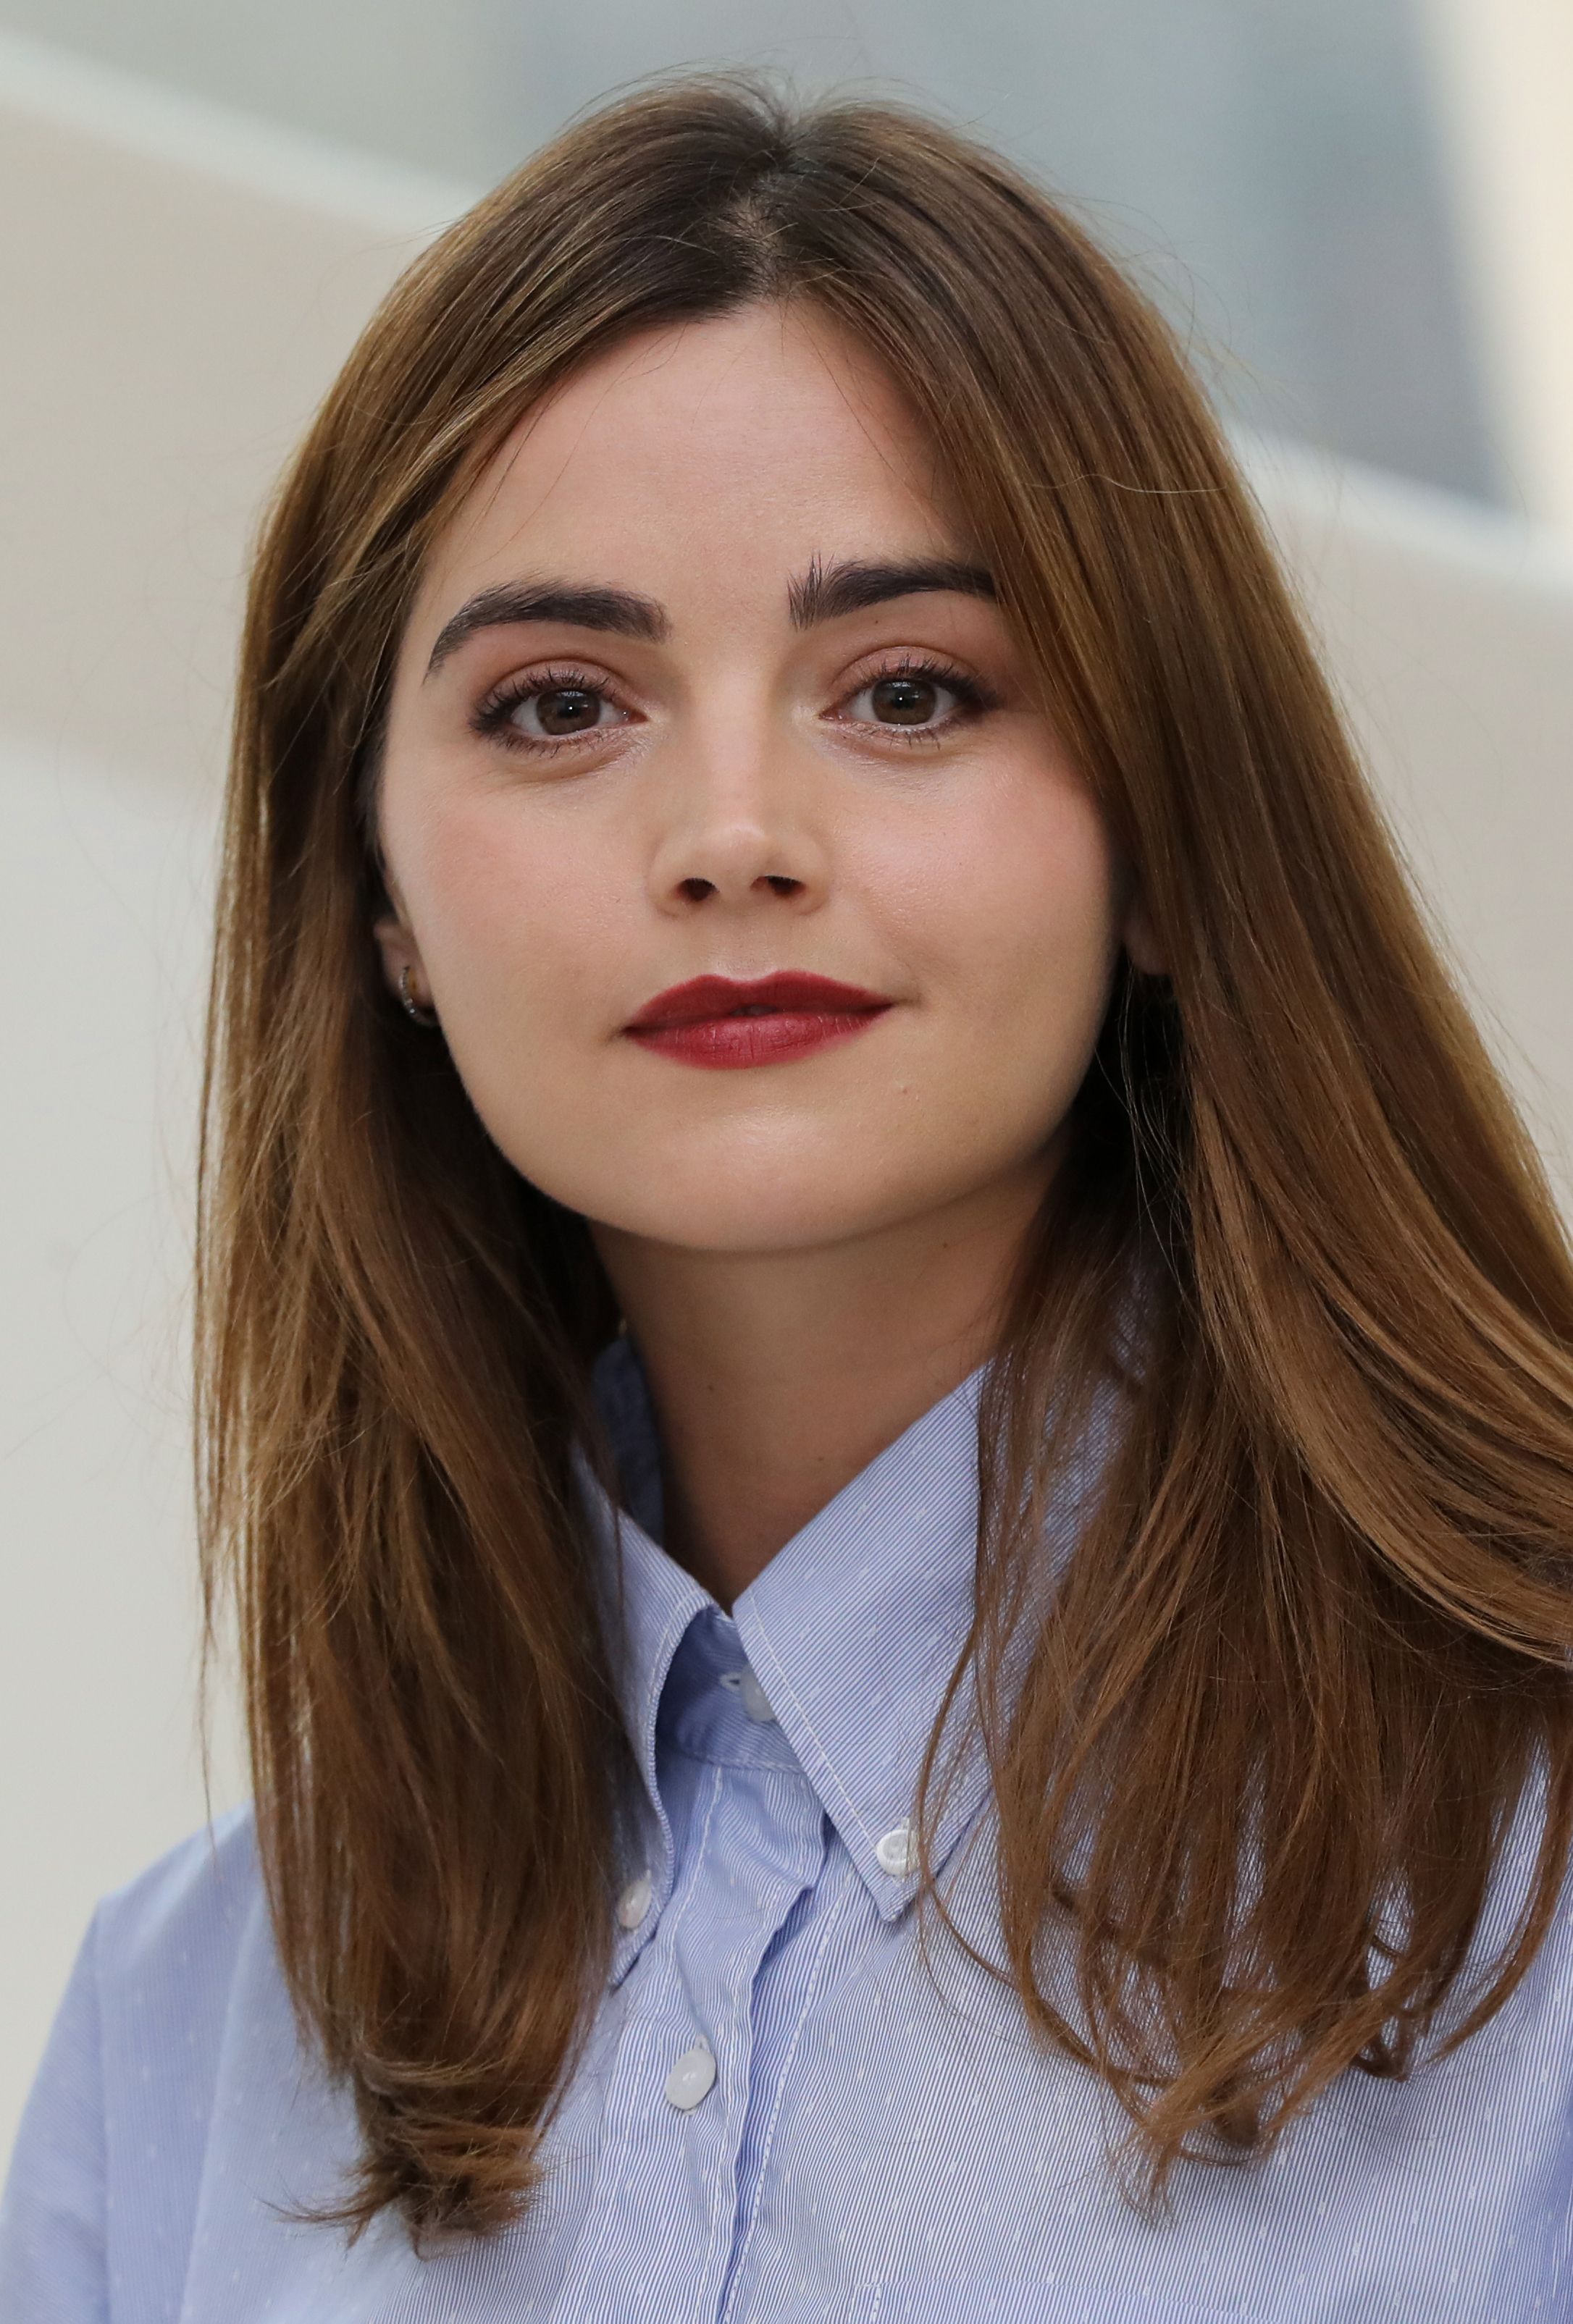 Oct 16 │photocall Of “the Cry” For 2018 Mipcom In Cannes 008~10 Adoring Jenna Coleman